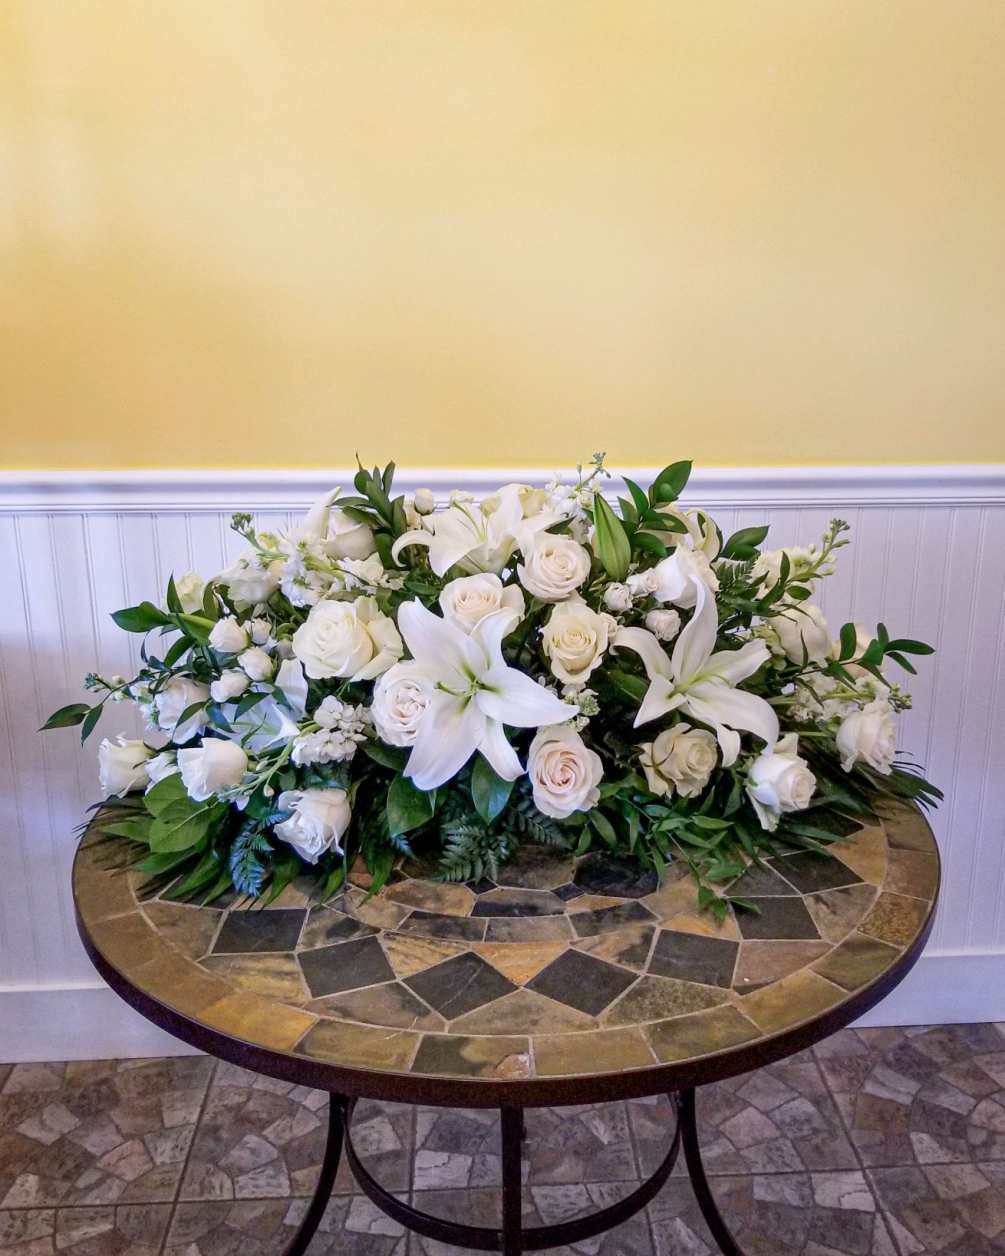 Created by our own Jacqueline&#039;s Flowers designers, this all white full casket